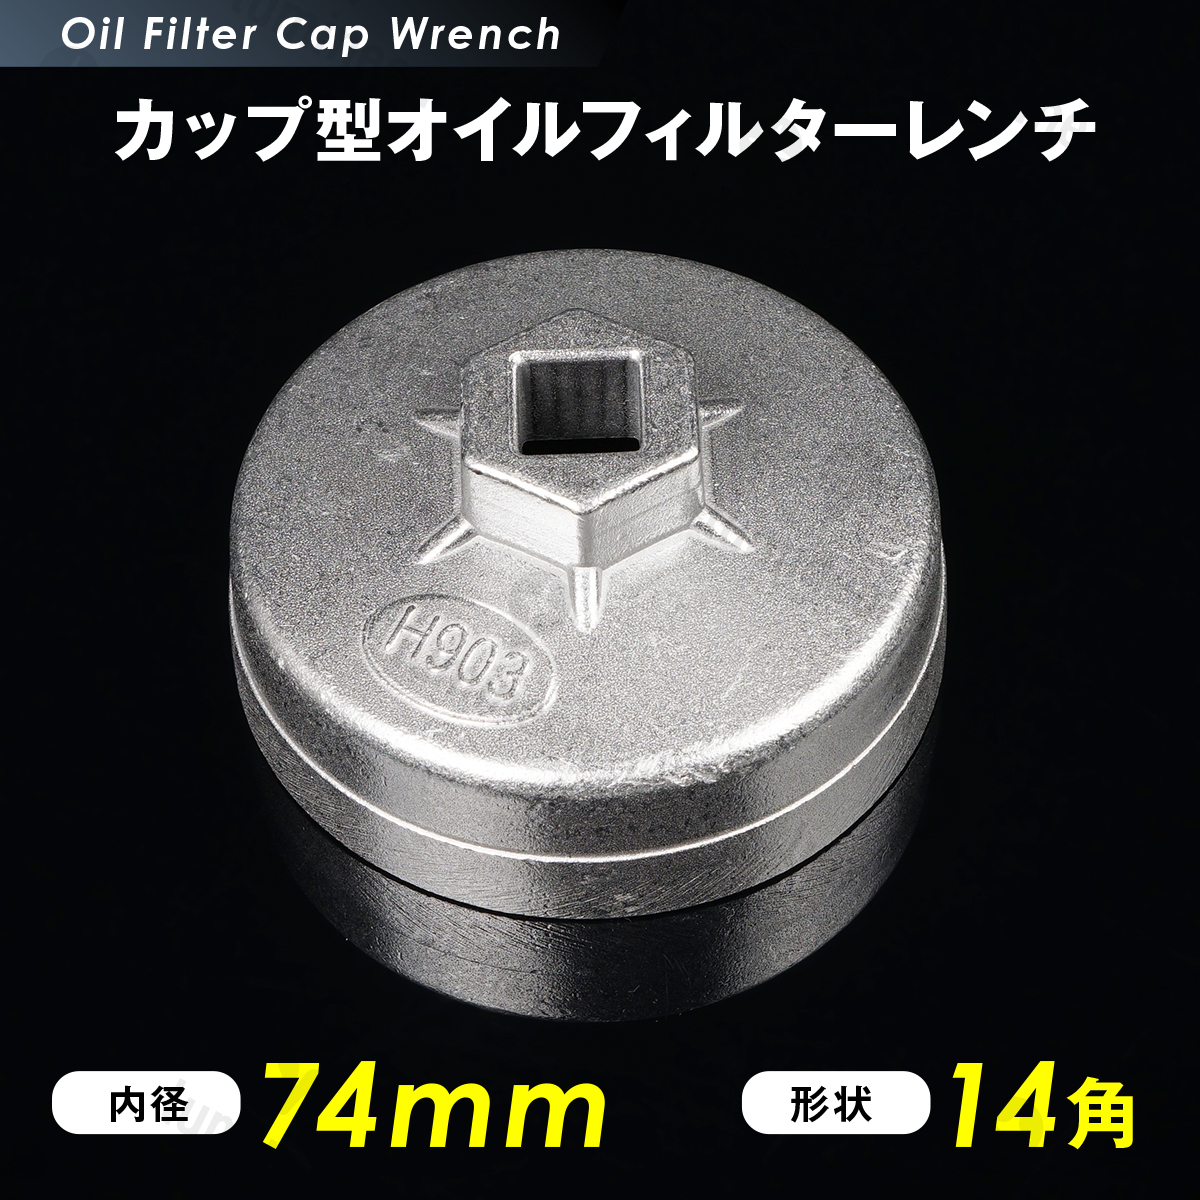  oil filter wrench cup type 74mm 14 angle 12.7sq hexagon car goods car tool oil exchange Jimny oil element wrench g210b 2